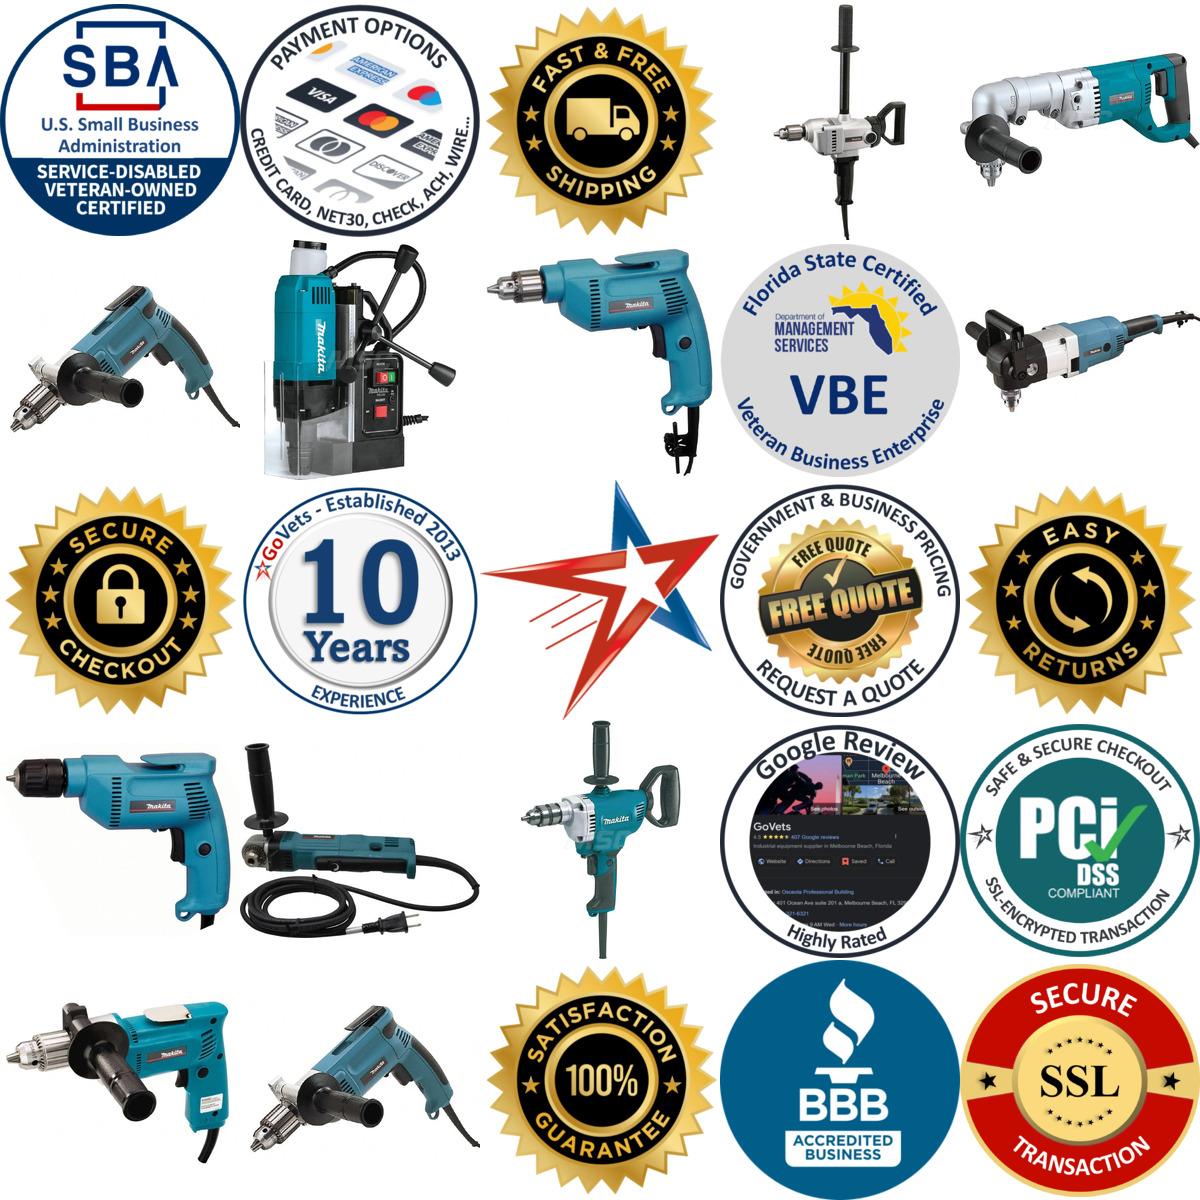 A selection of Makita products on GoVets